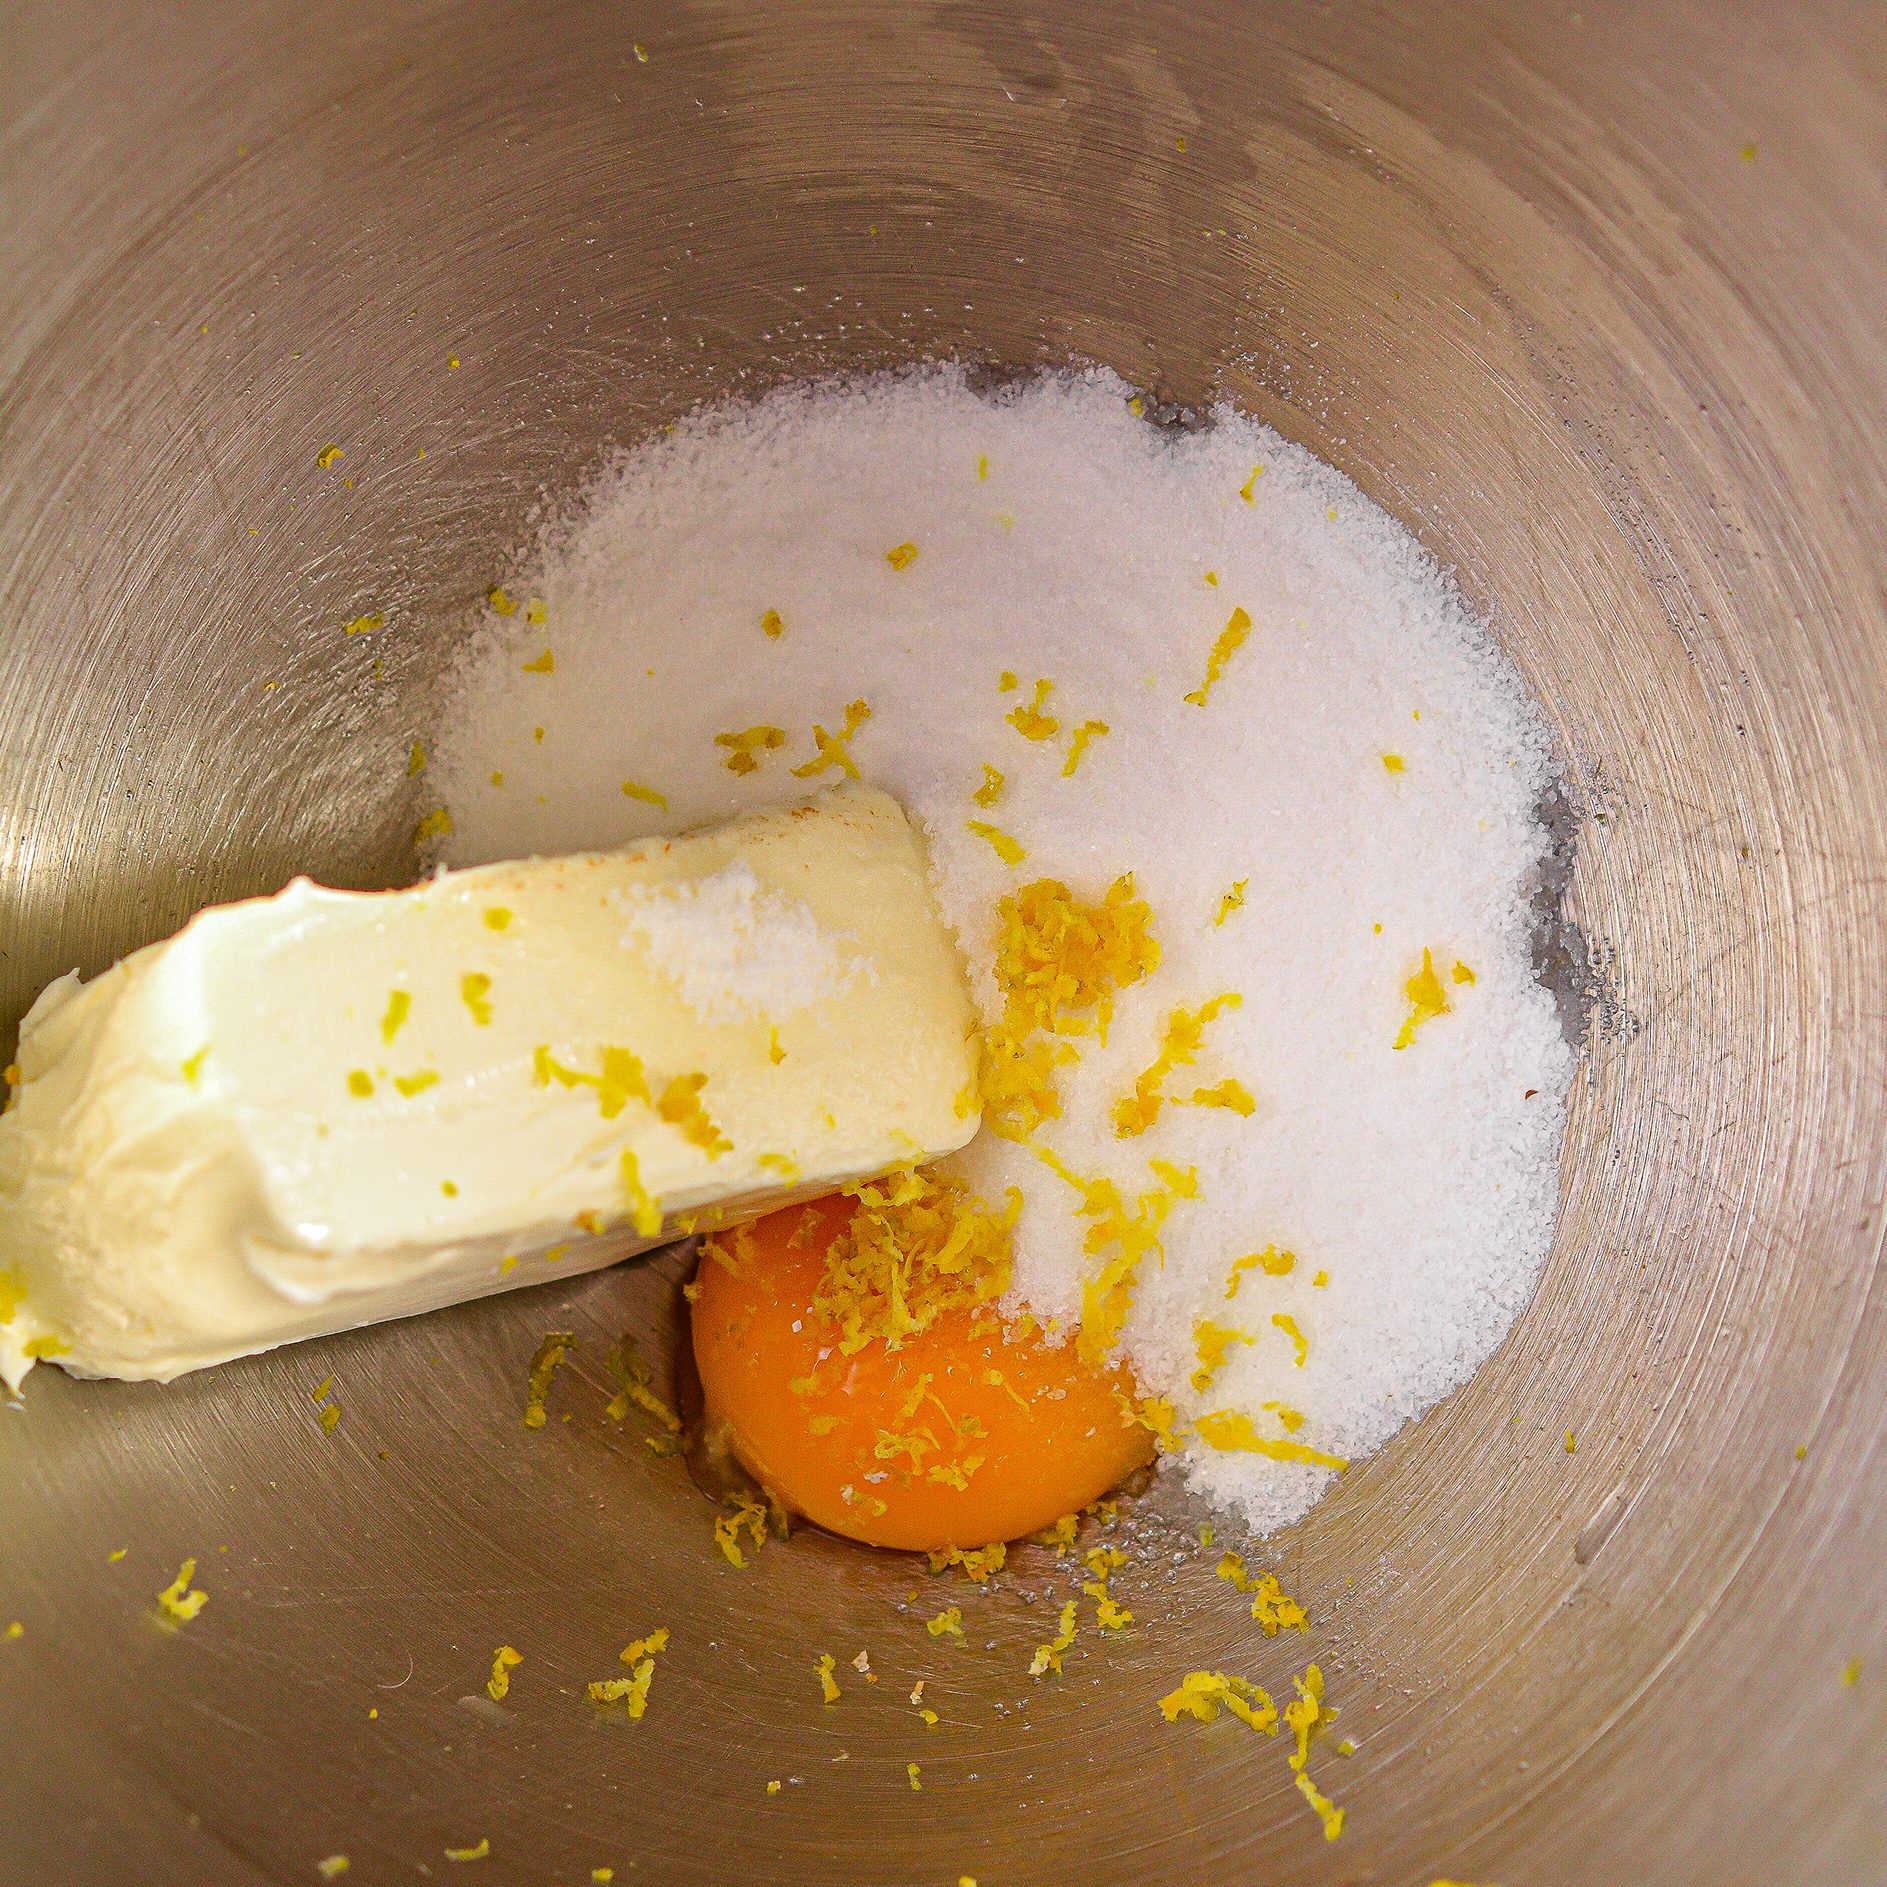 In a mixing bowl, beat together the cream cheese, granulated sugar, lemon zest, vanilla extract and egg yolk until smooth and creamy.